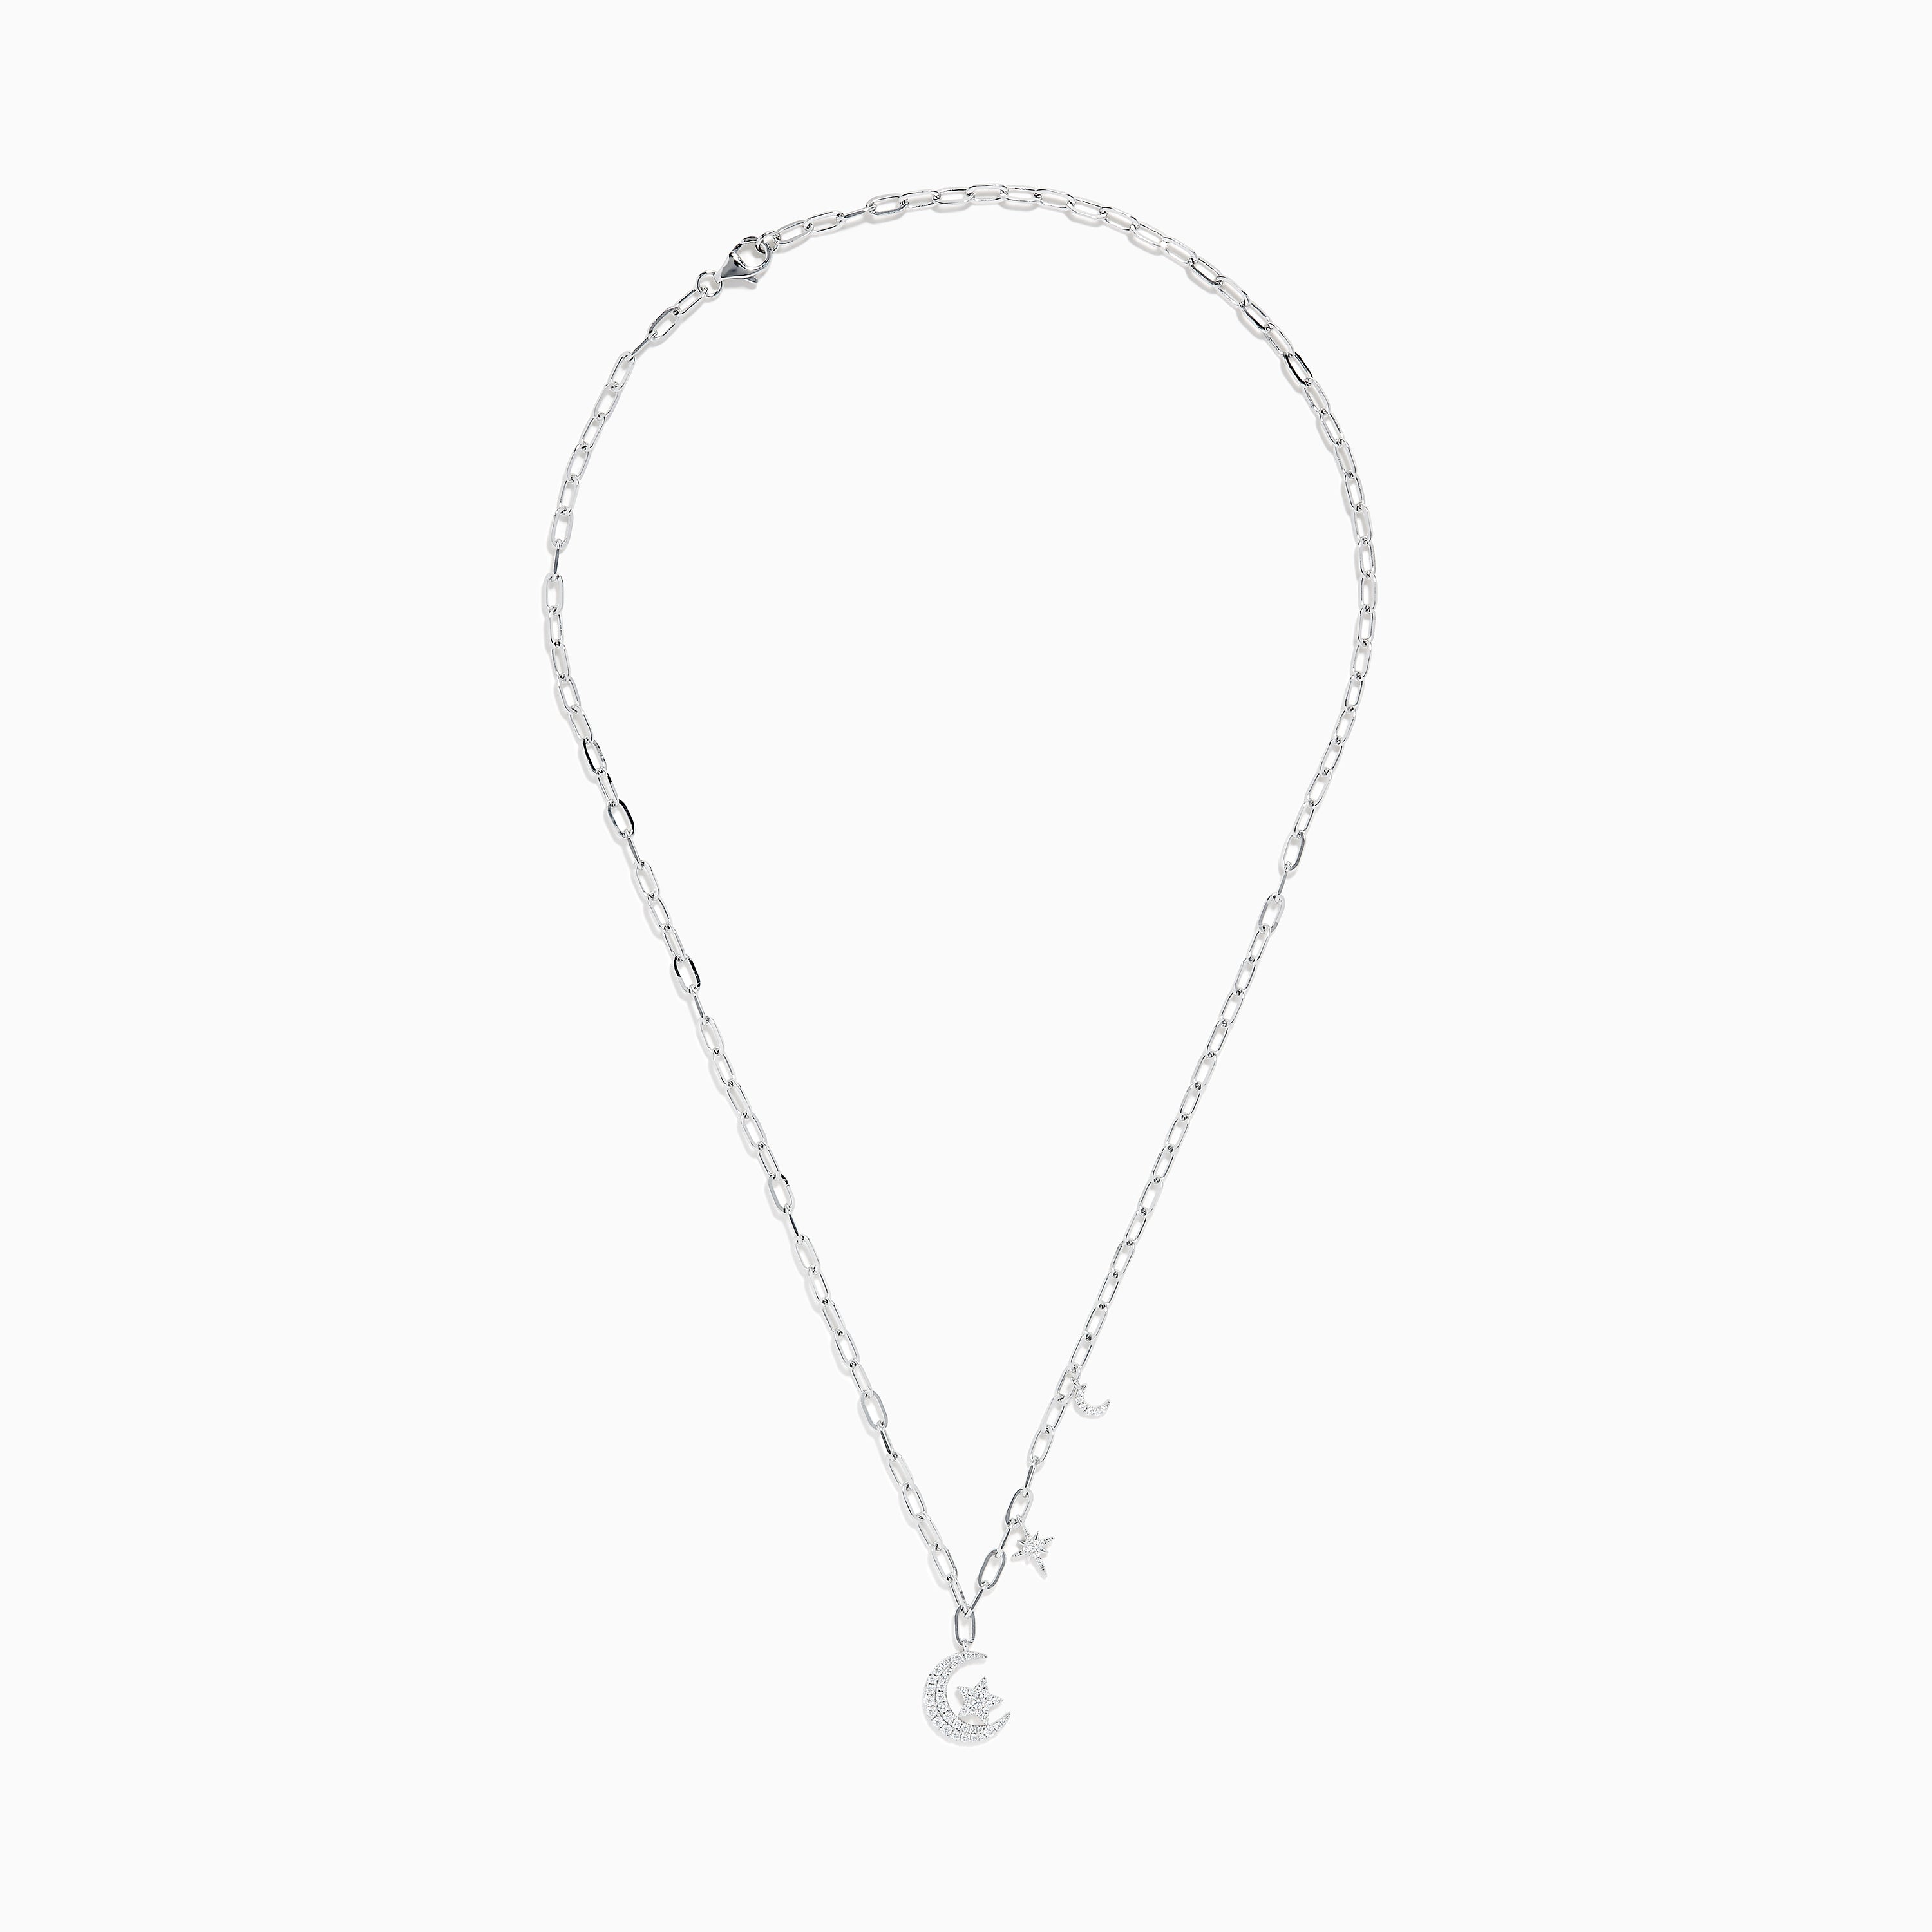 Solid Gold La Luna Moonface Charm Necklace with Ethical Diamond Eye 14ct White Gold / with Diamond / without Chain